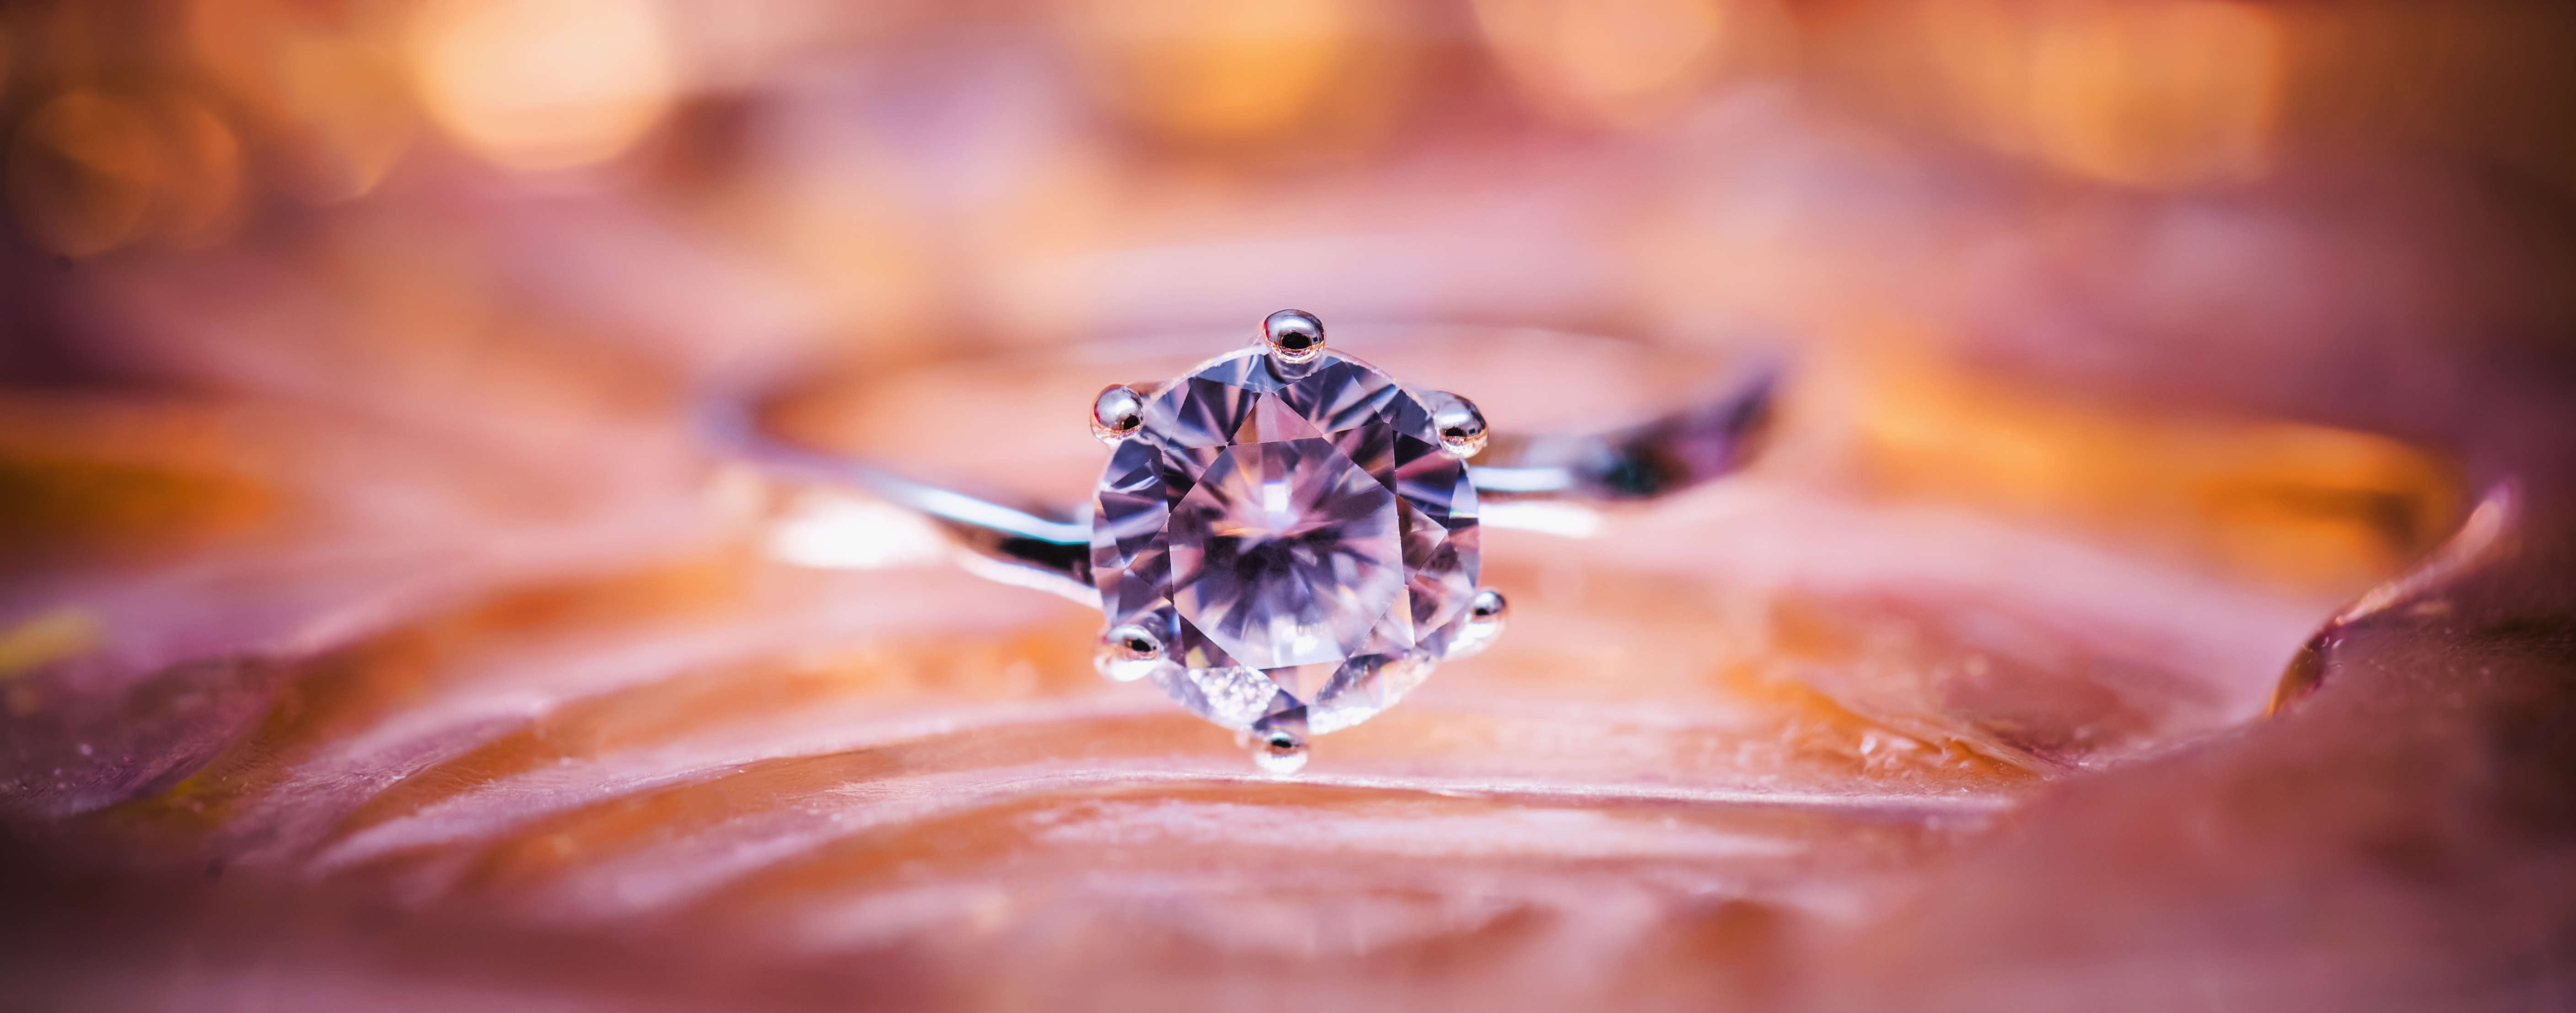 How to Clean Your Diamond Ring: From Soap to Vodka, Jewelry